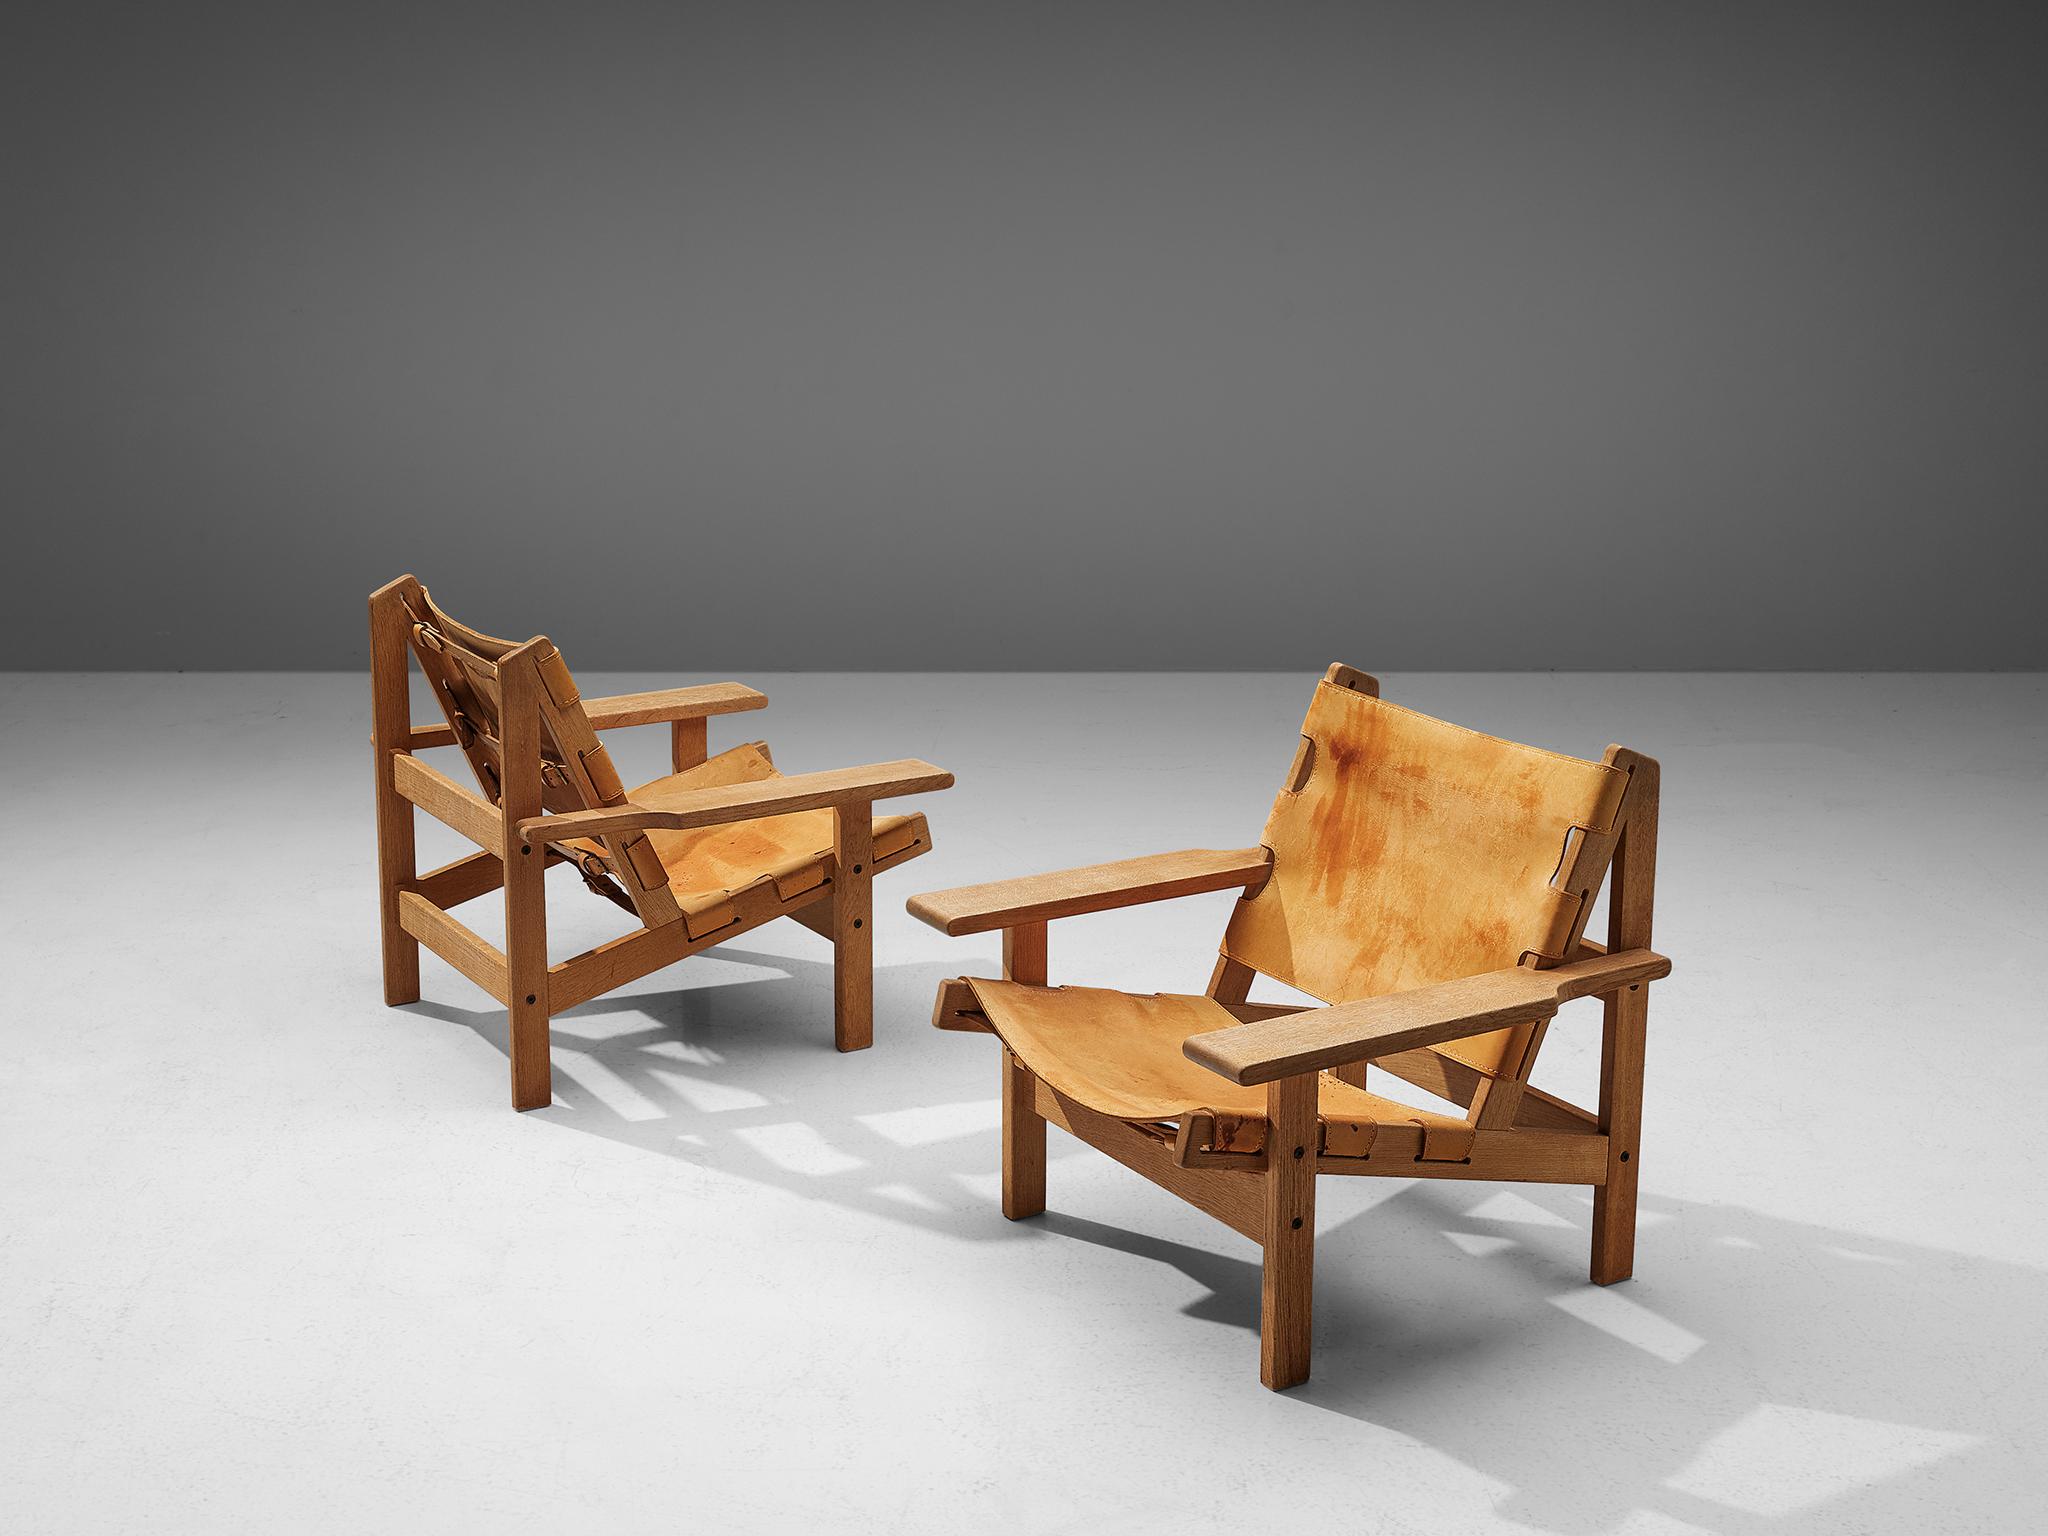 Erling Jessen, pair of lounge chairs model 168, solid oak, leather, Denmark, 1960s.

This set shows exquisite Danish craftsmanship and aesthetics. The set features traits of its hunting- and a cabin lodge-style thanks to its strong, sturdy